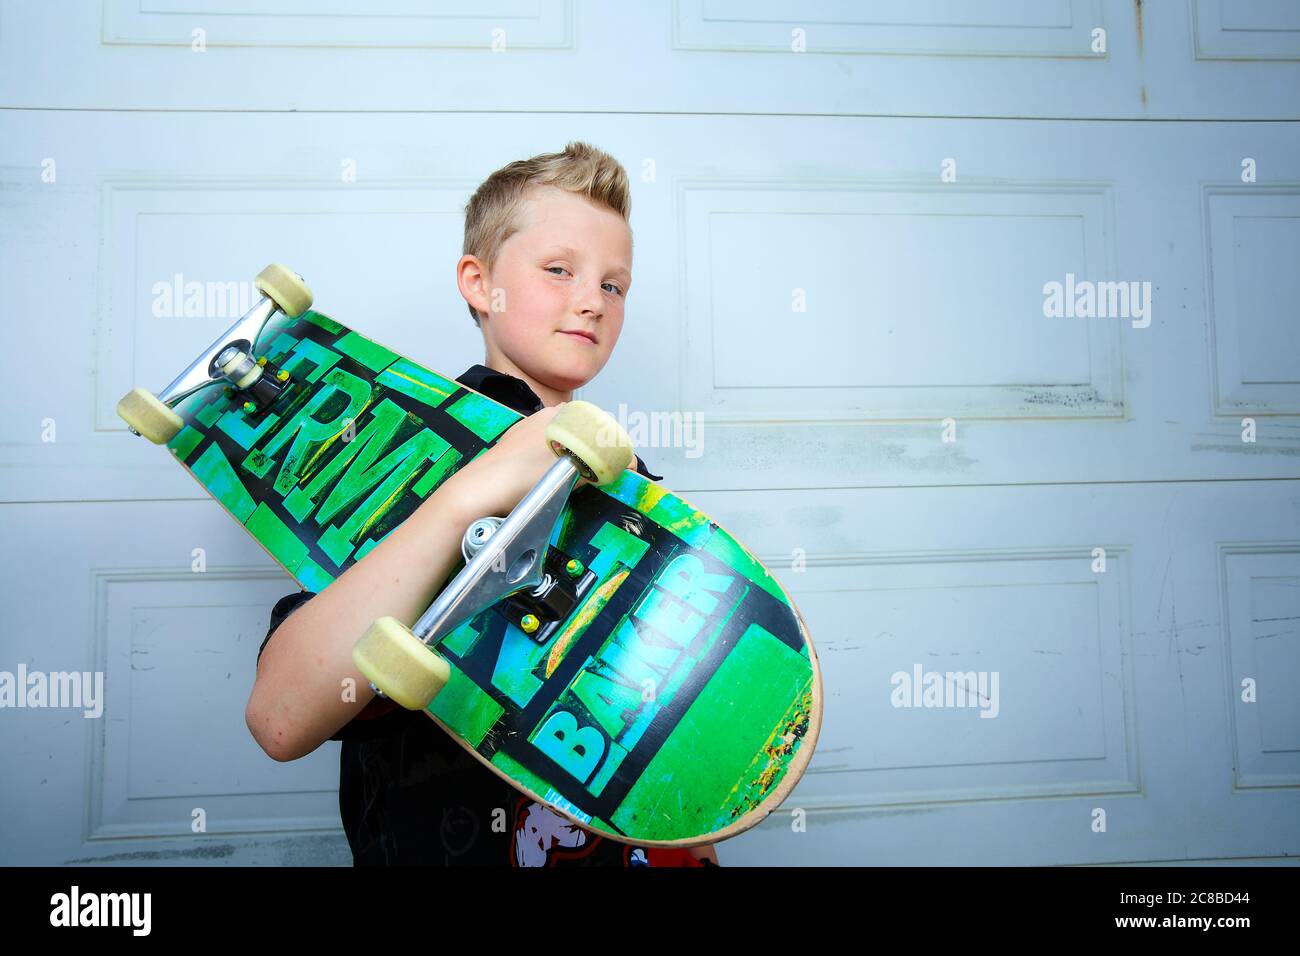 Feeling the wind in his hair - the young blond boy embraces his freedom of expression through his skateboarding. Stock Photo